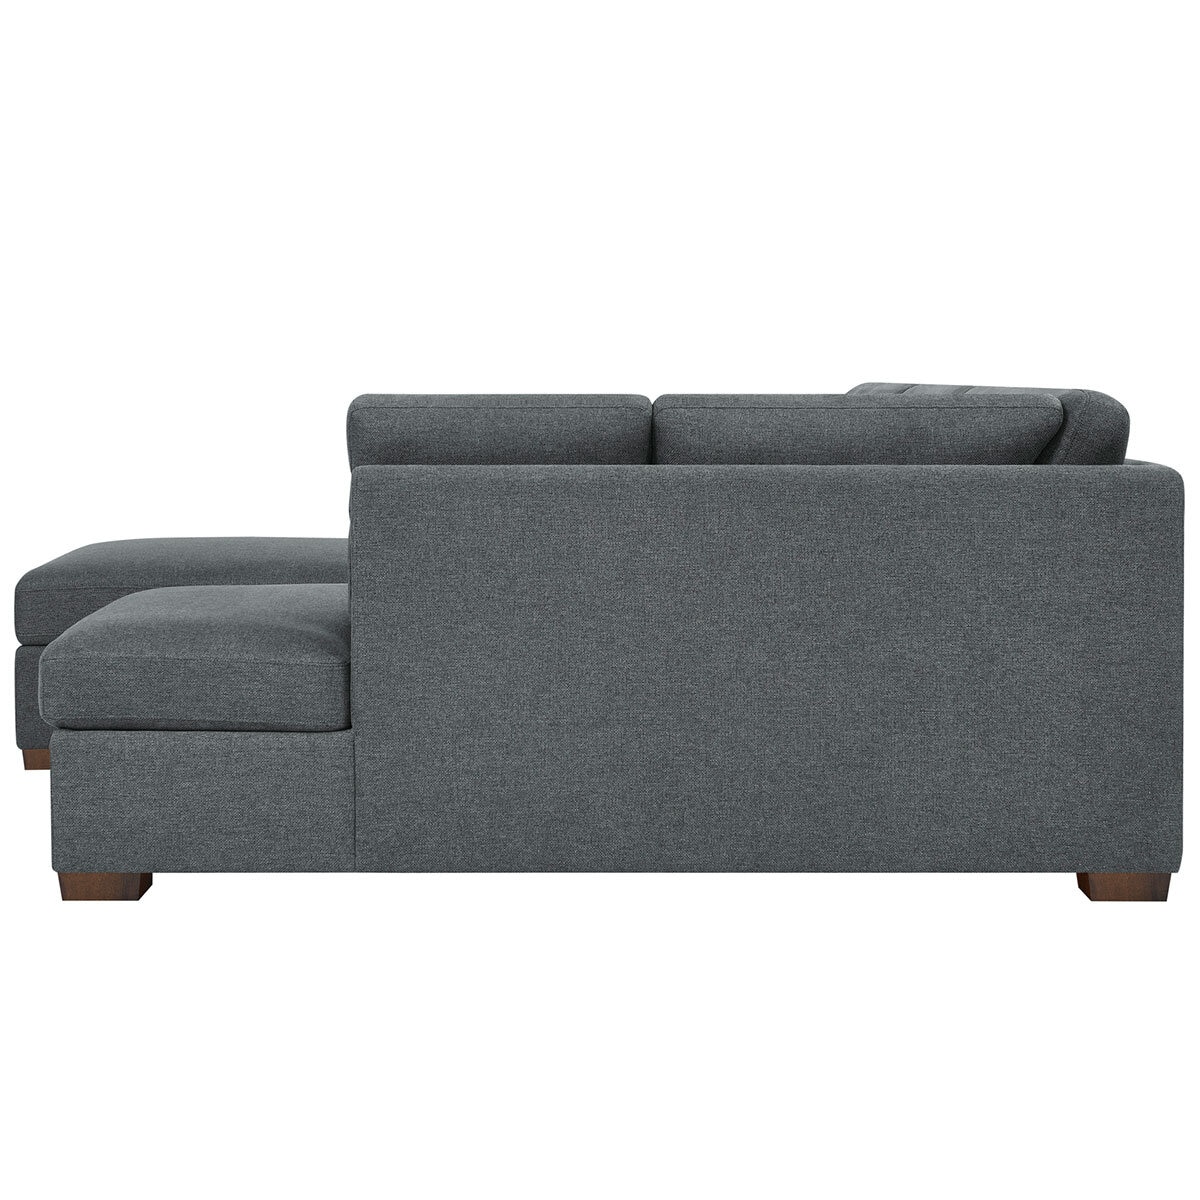 Thomasville 3 PC Fabric Sectional With Storage Ottoman